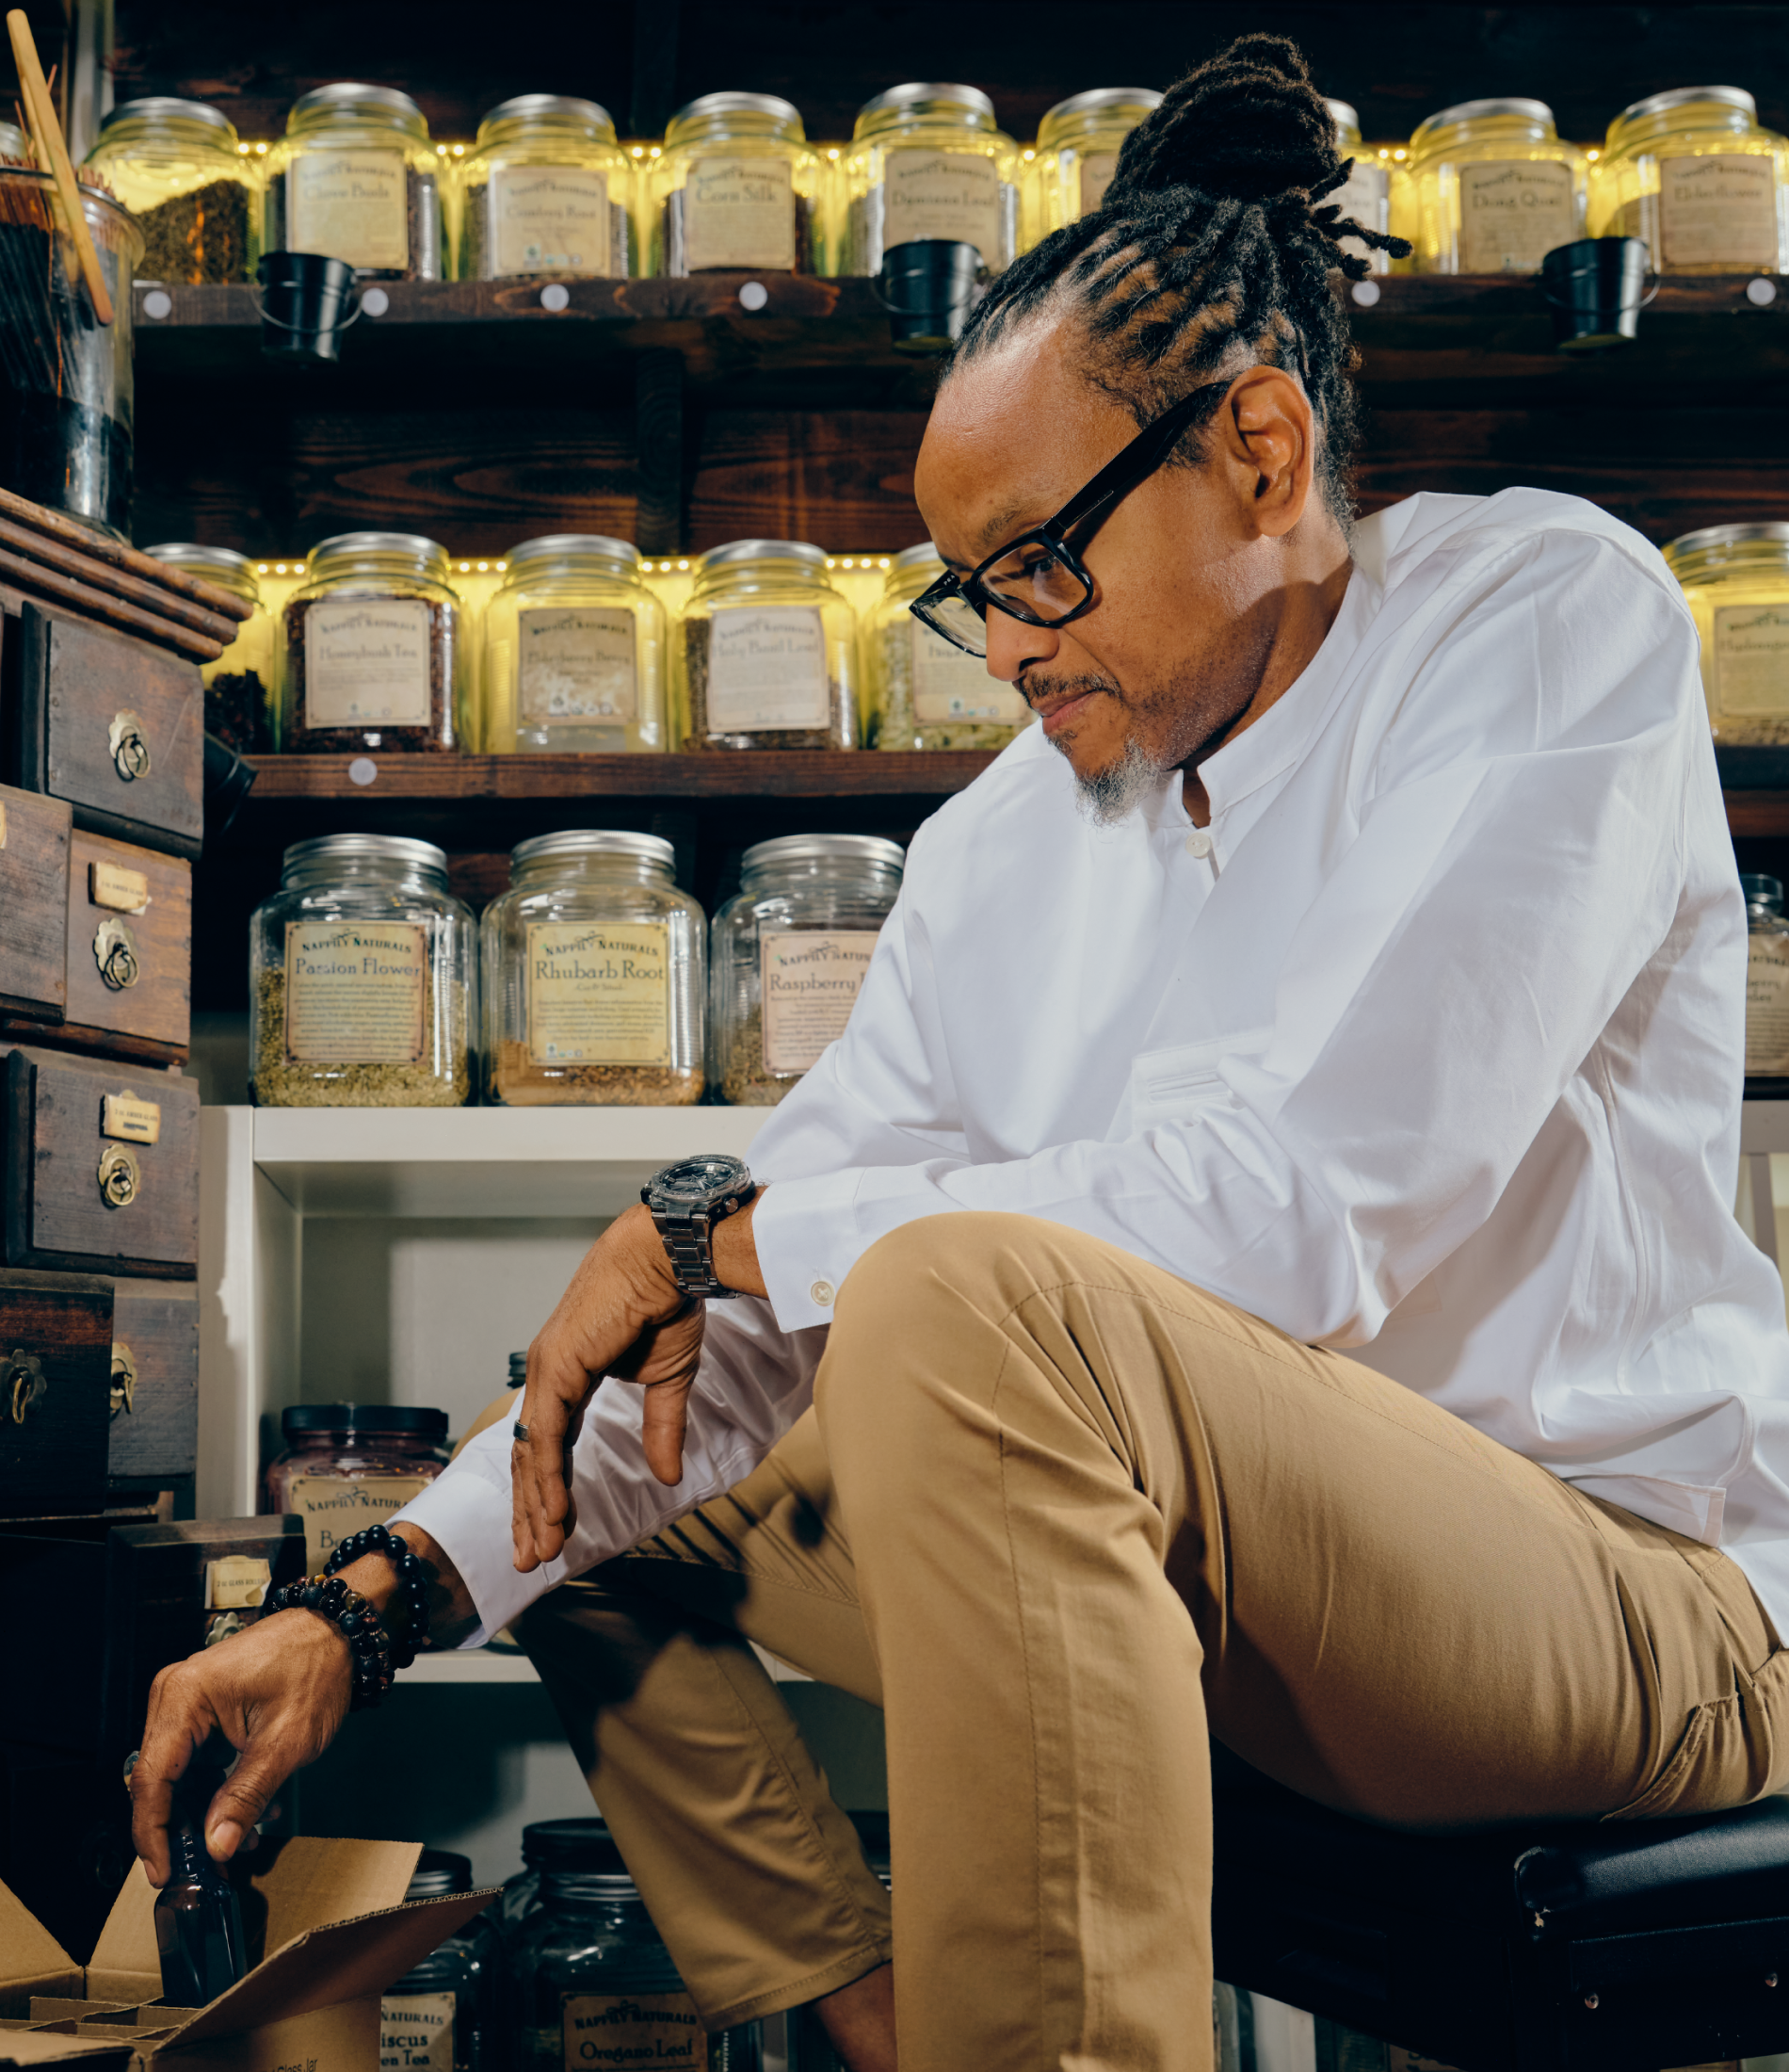 A person kneels on the ground looking at items for inventory in front of a wall with jars of loose-leaf herbs.